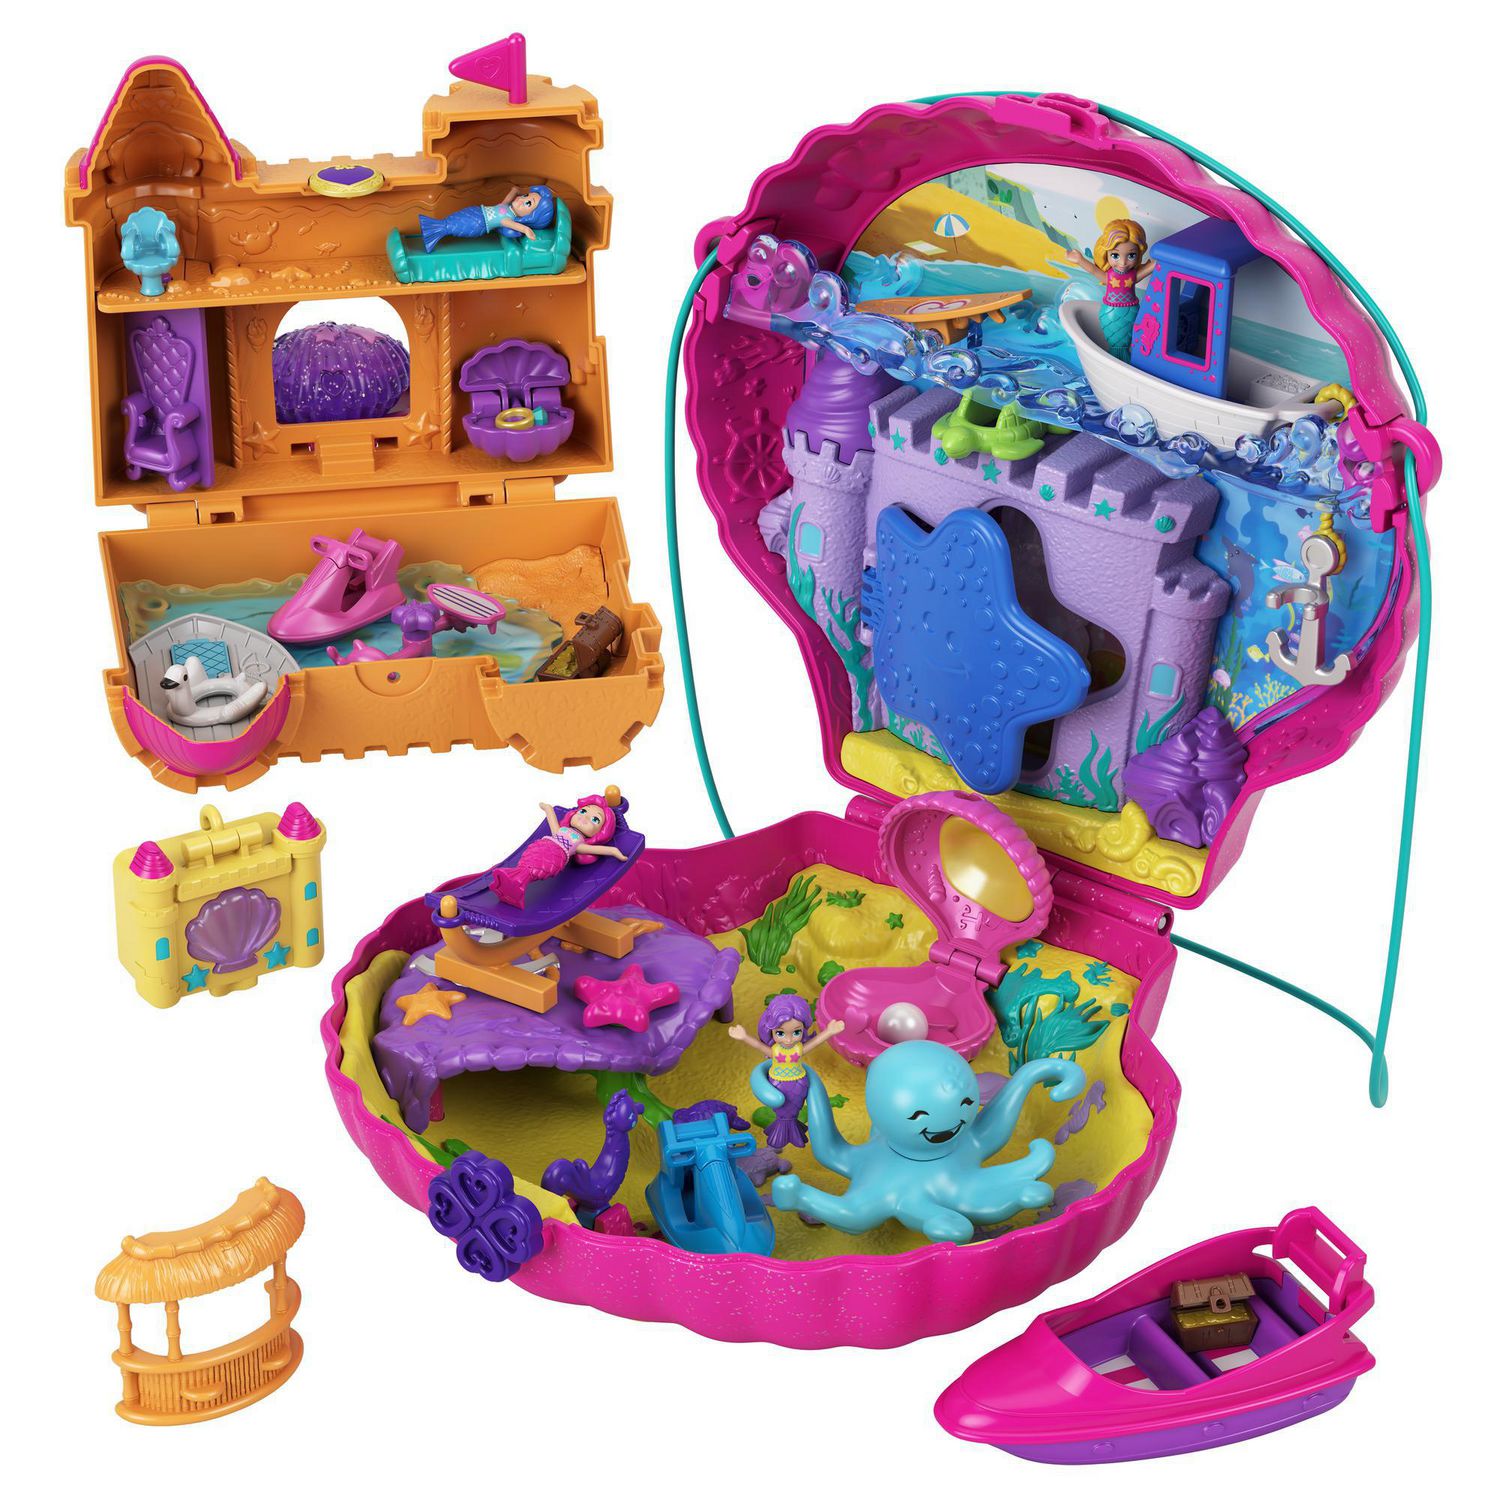 Polly Pocket Style & Sparkle Mermaid Pack with 4 Micro Dolls